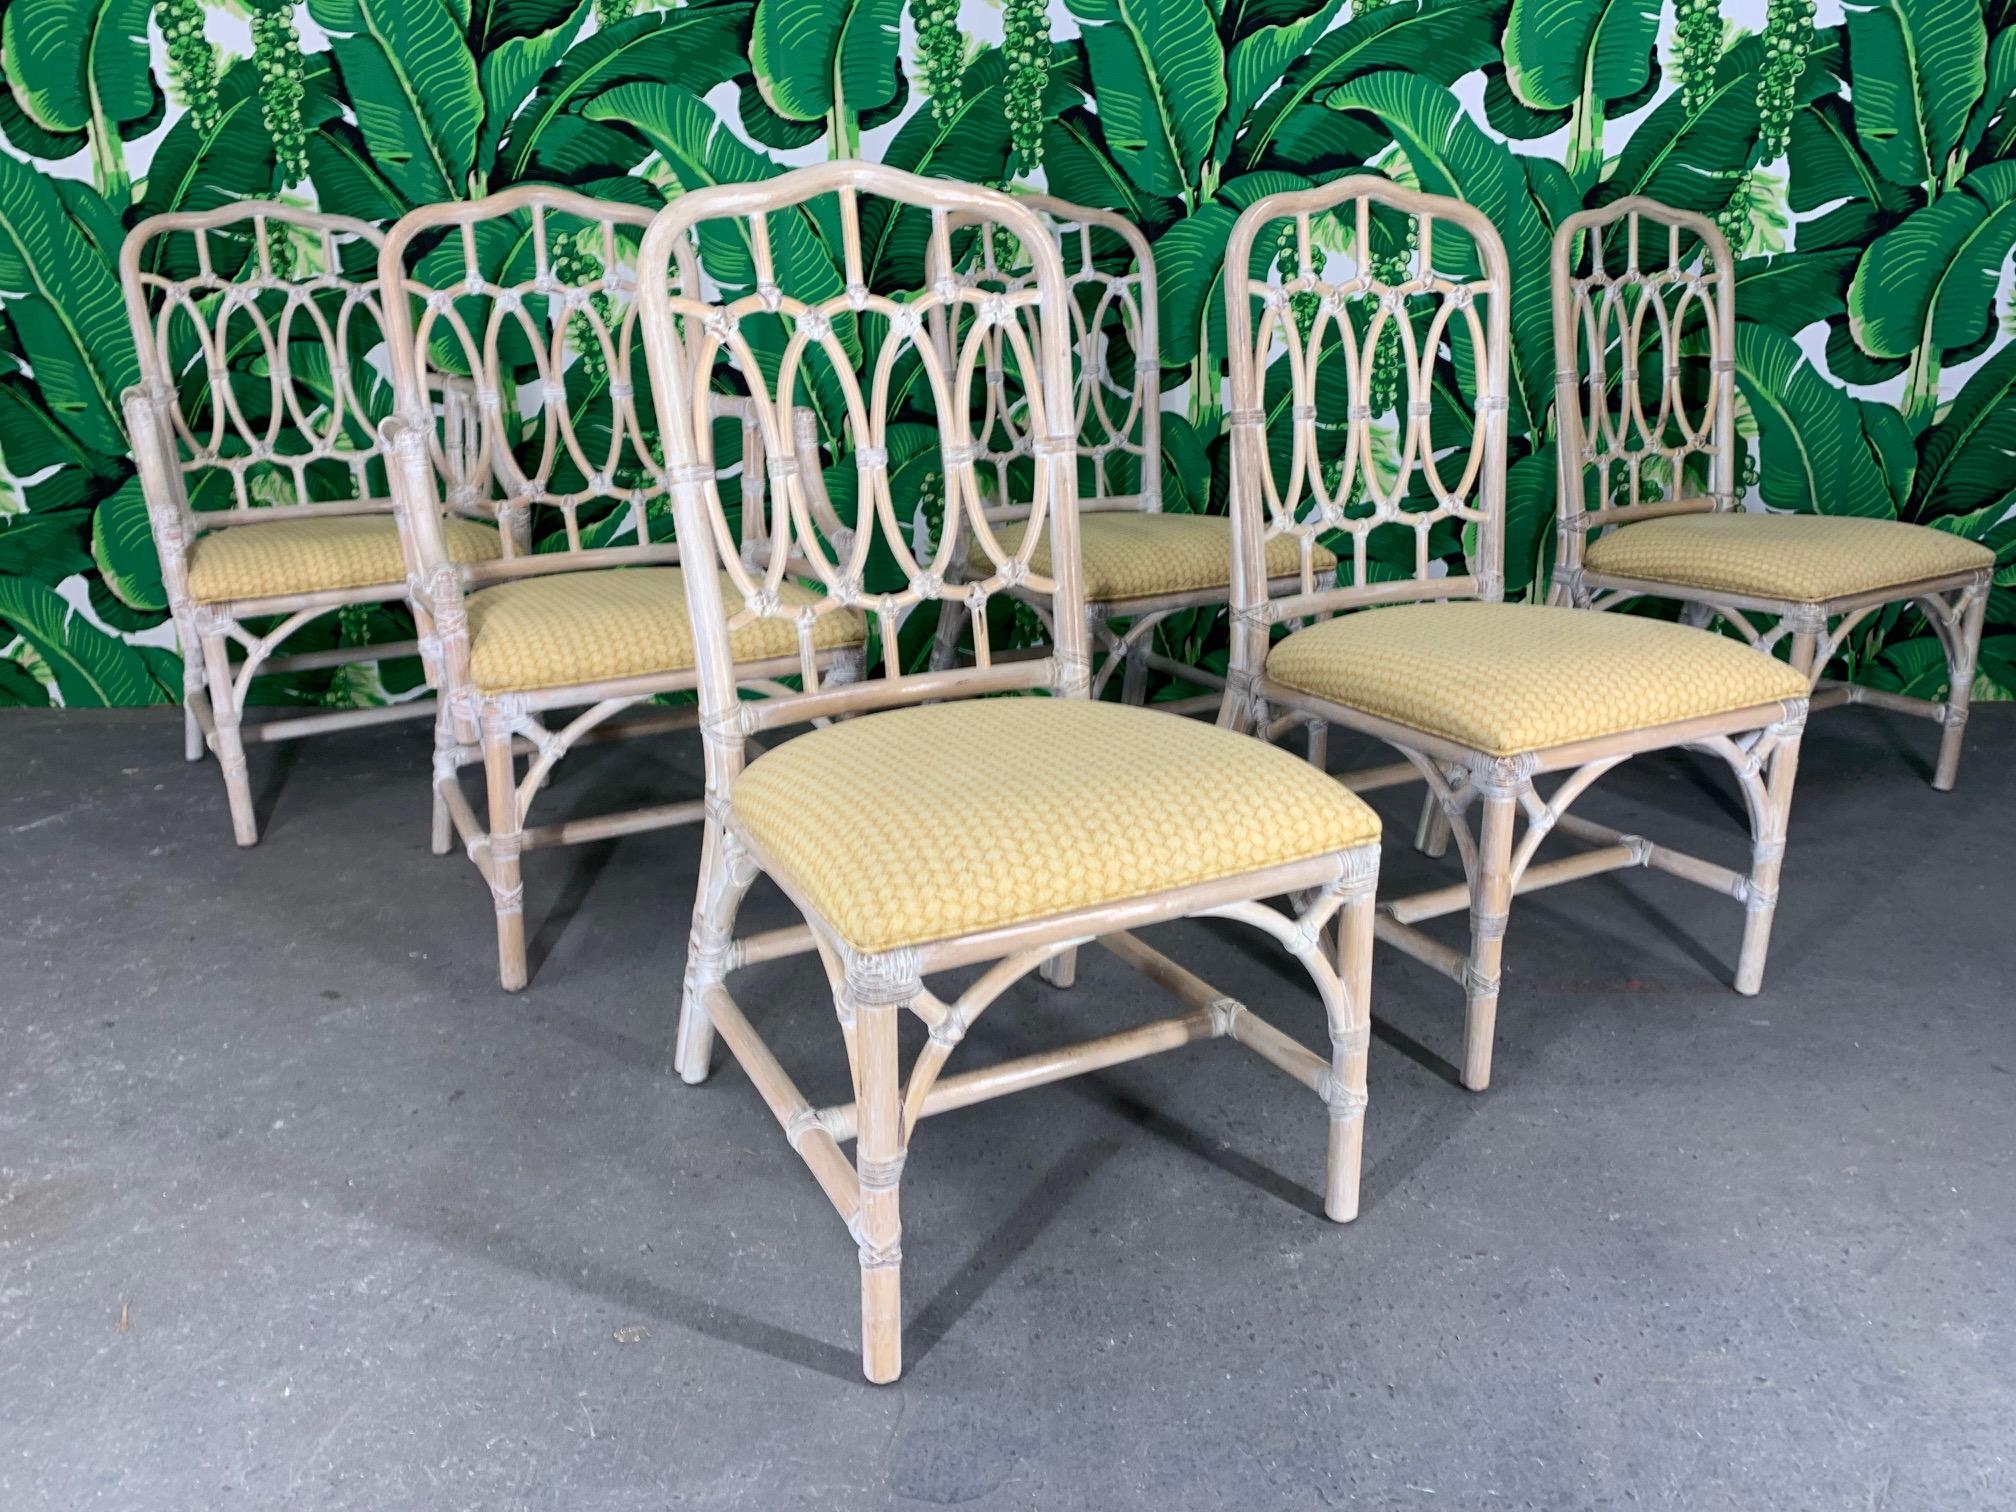 Set of 6 vintage rattan dining chairs by Lexington Furniture Co. featuring an attractive loop-back design. Very good condition with only minor imperfections consistent with age. Seat height measures 17.5